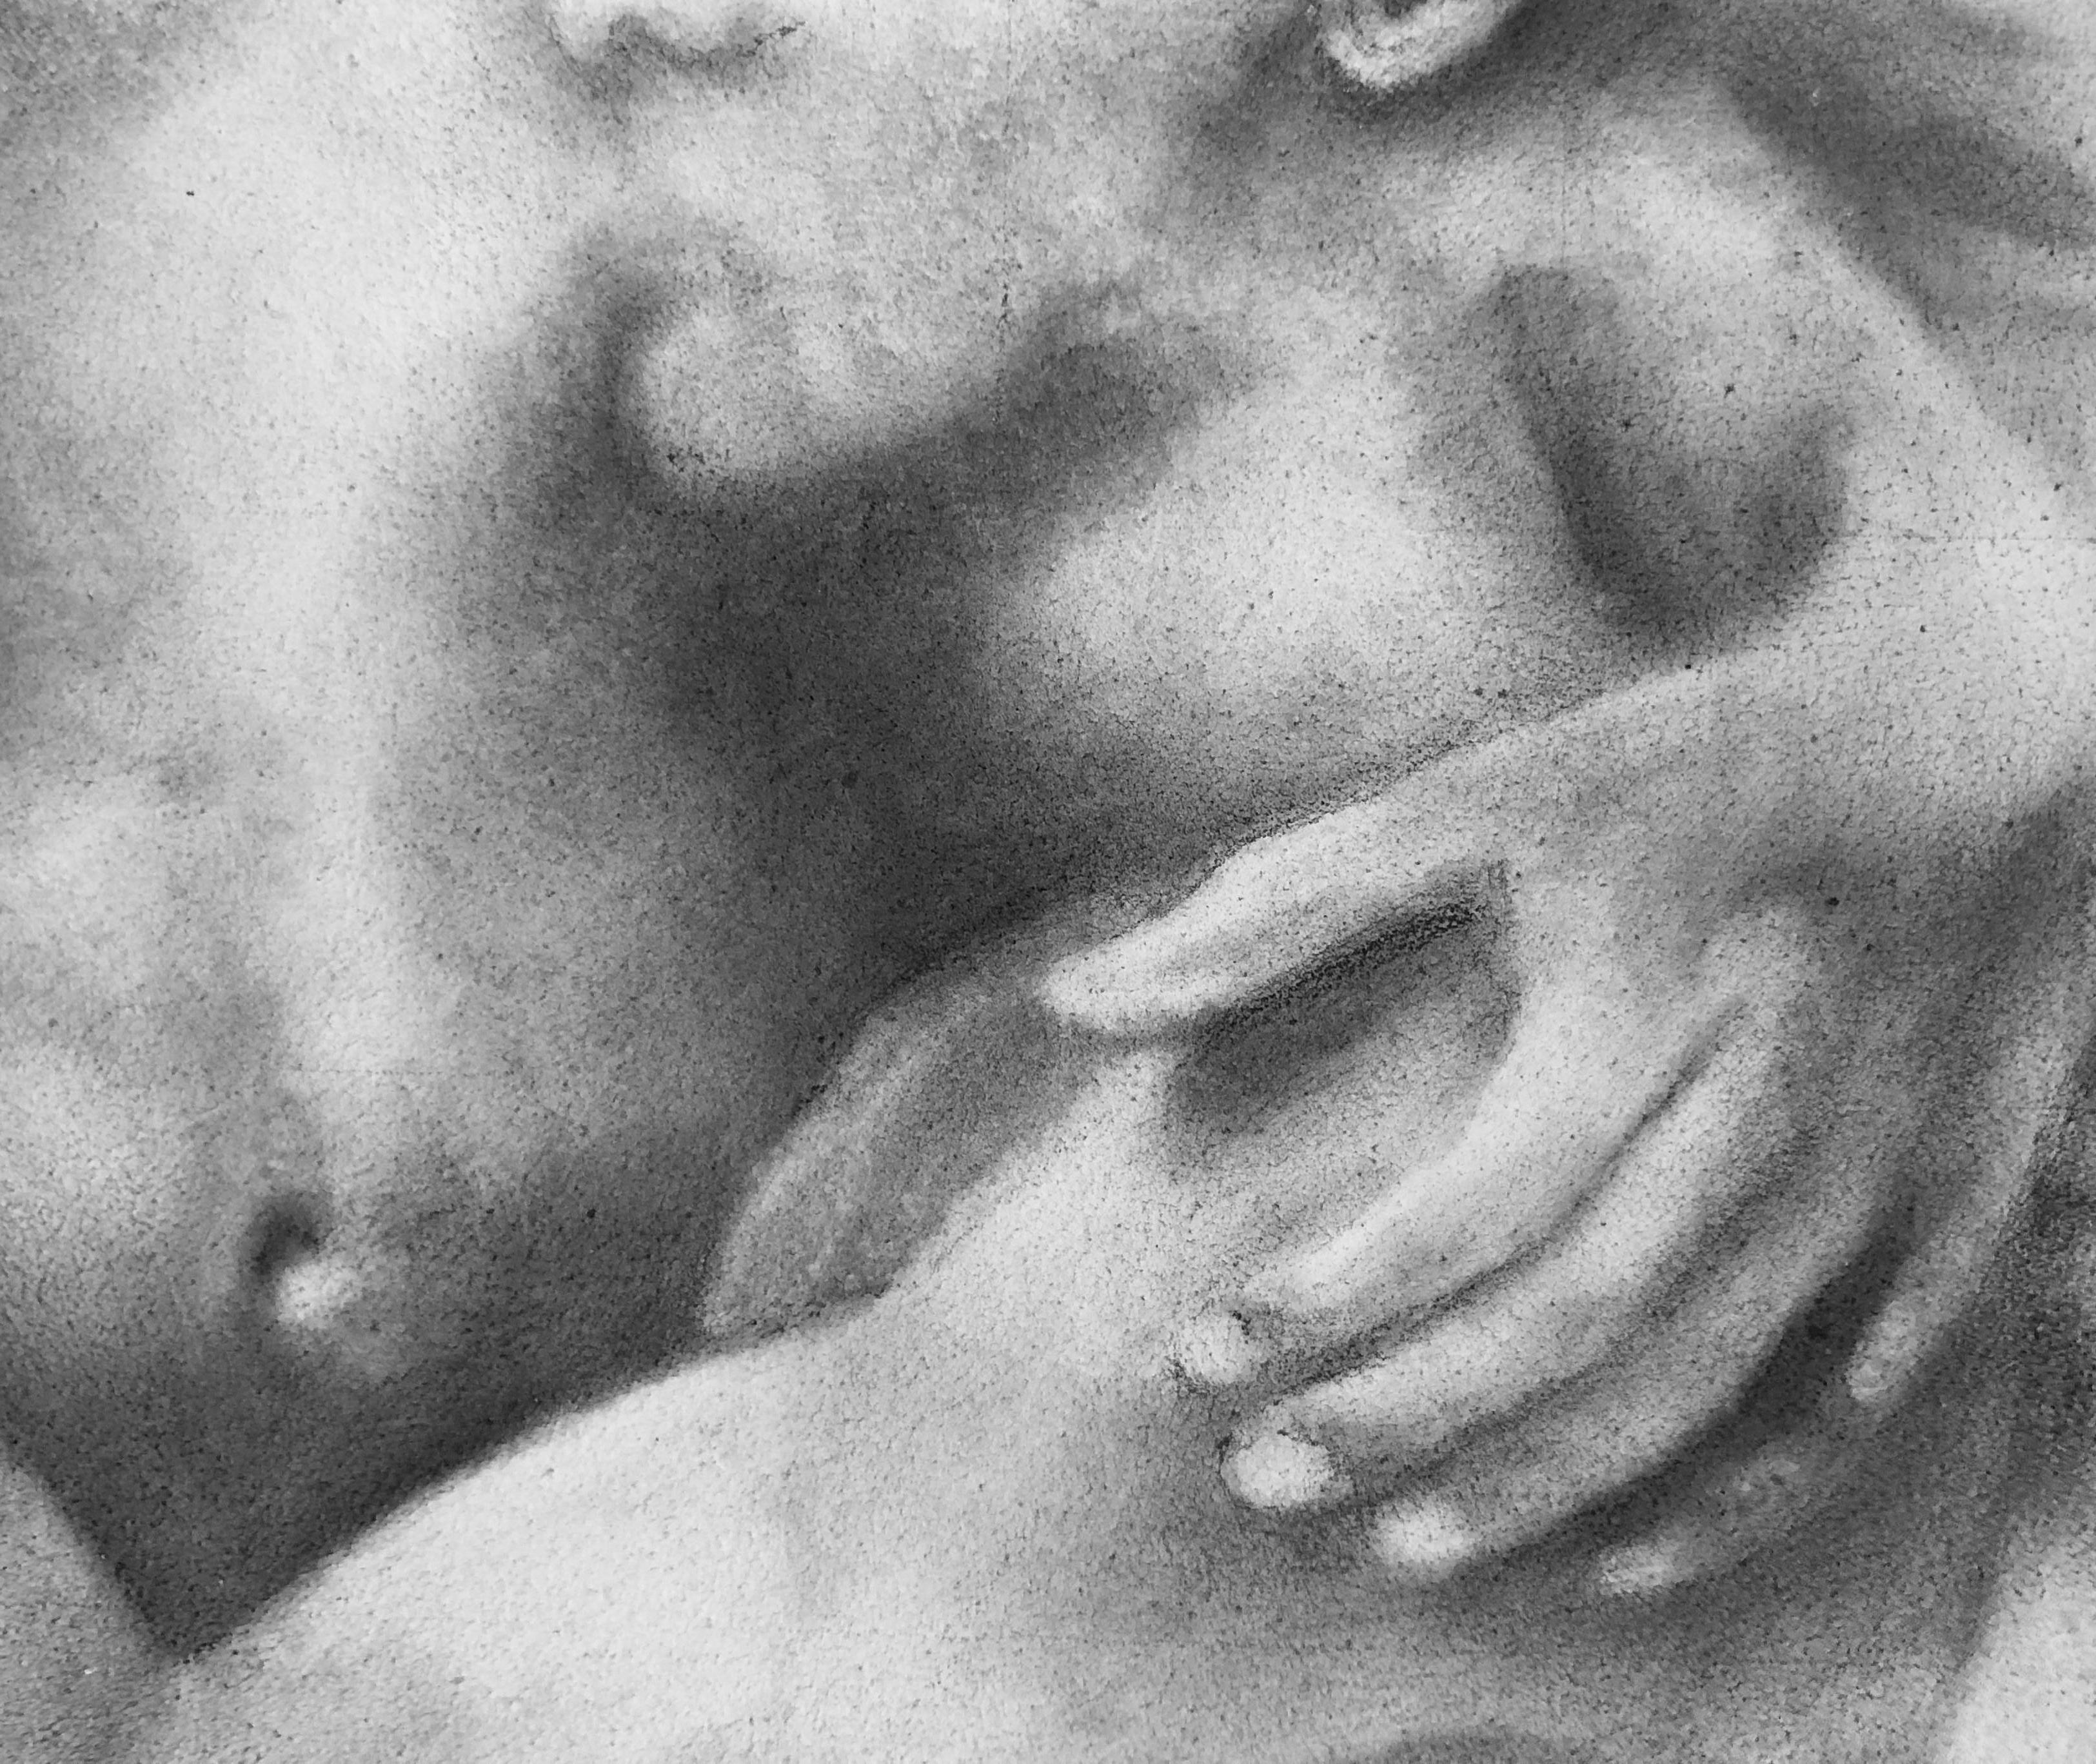 Proximity - Embracing Nude Figures, Original Graphite Drawing on Panel - Contemporary Art by Rick Sindt